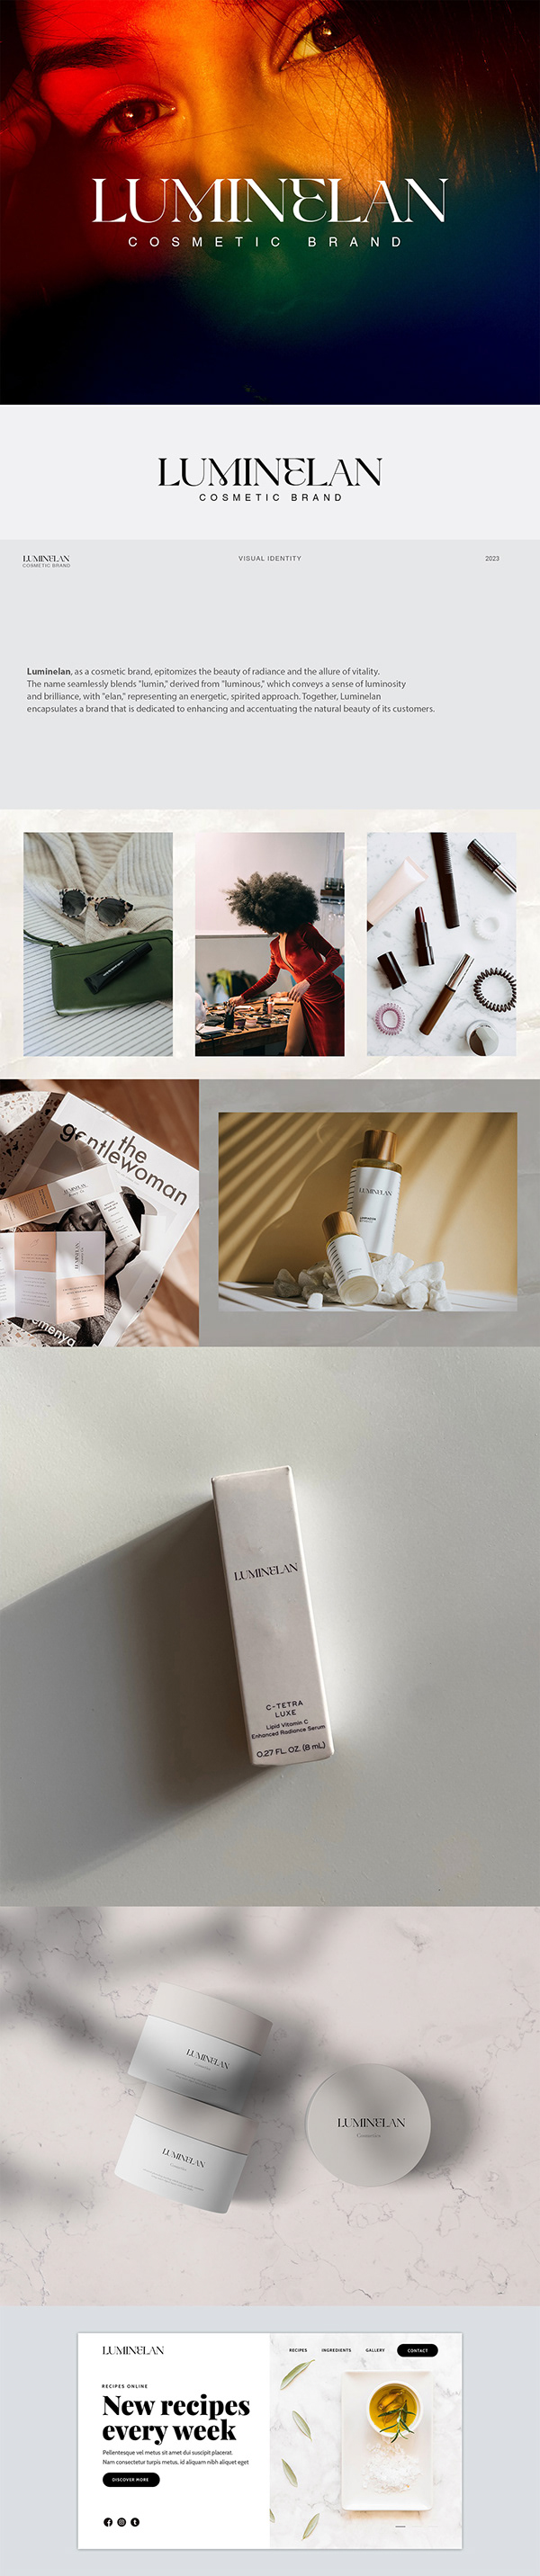 logo and visual identity for cosmetic brand/Luminelan